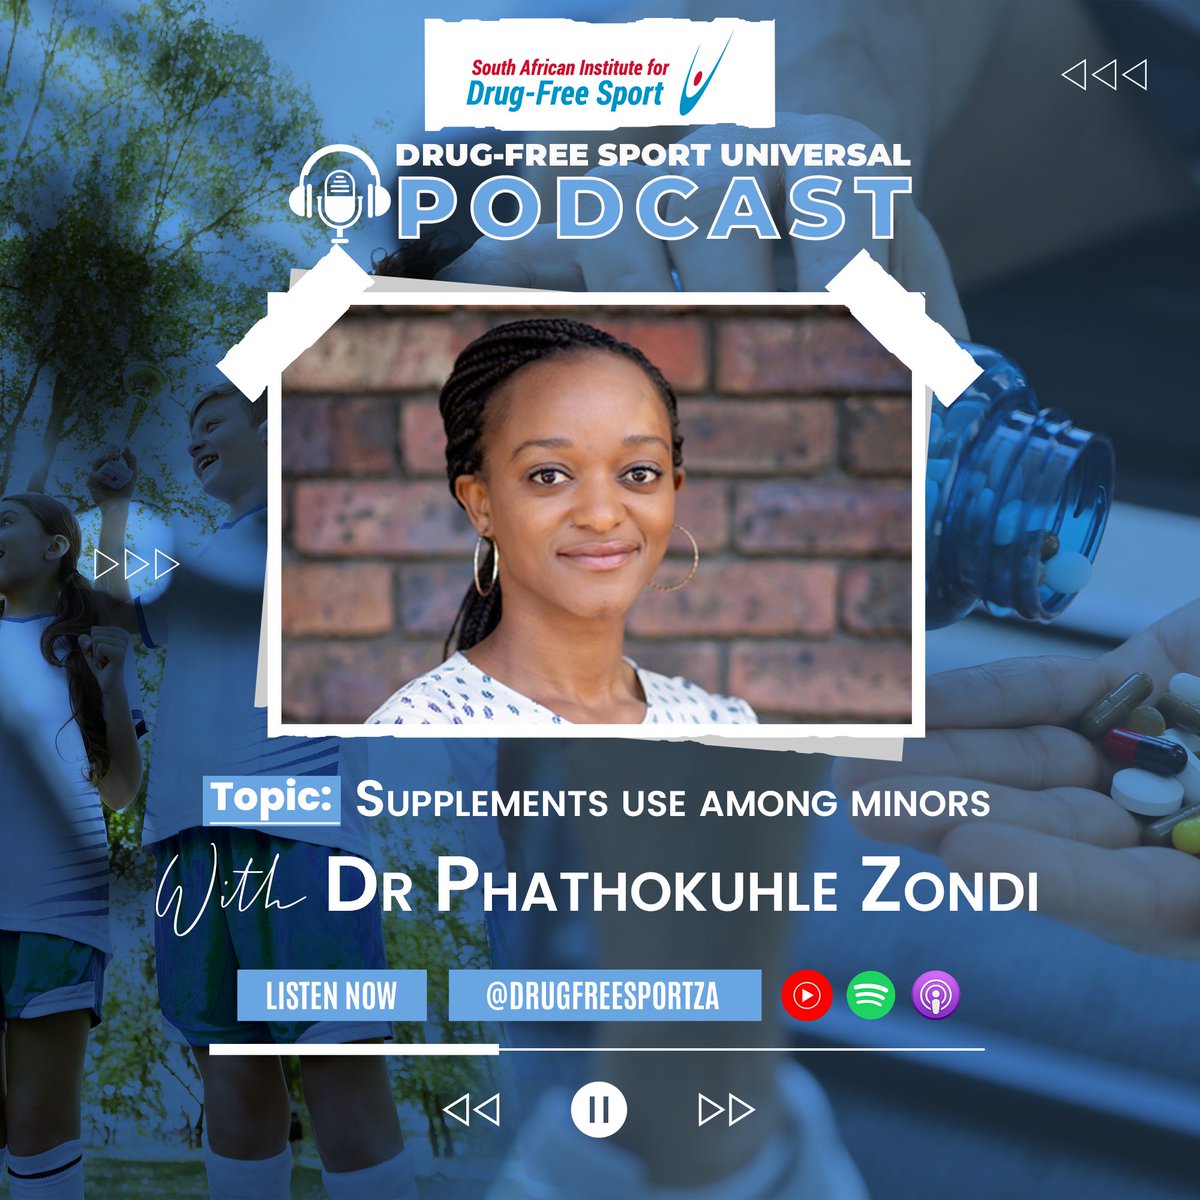 SAIDS Podcast episode with Dr. Phathokuhle Zondi! Tune in at the link below as we explore the vital topic of supplement use among minors. open.spotify.com/episode/7c7B1C… #SAIDSPodcast #Supplements #YouthHealth #DrPhathokuhleZondi